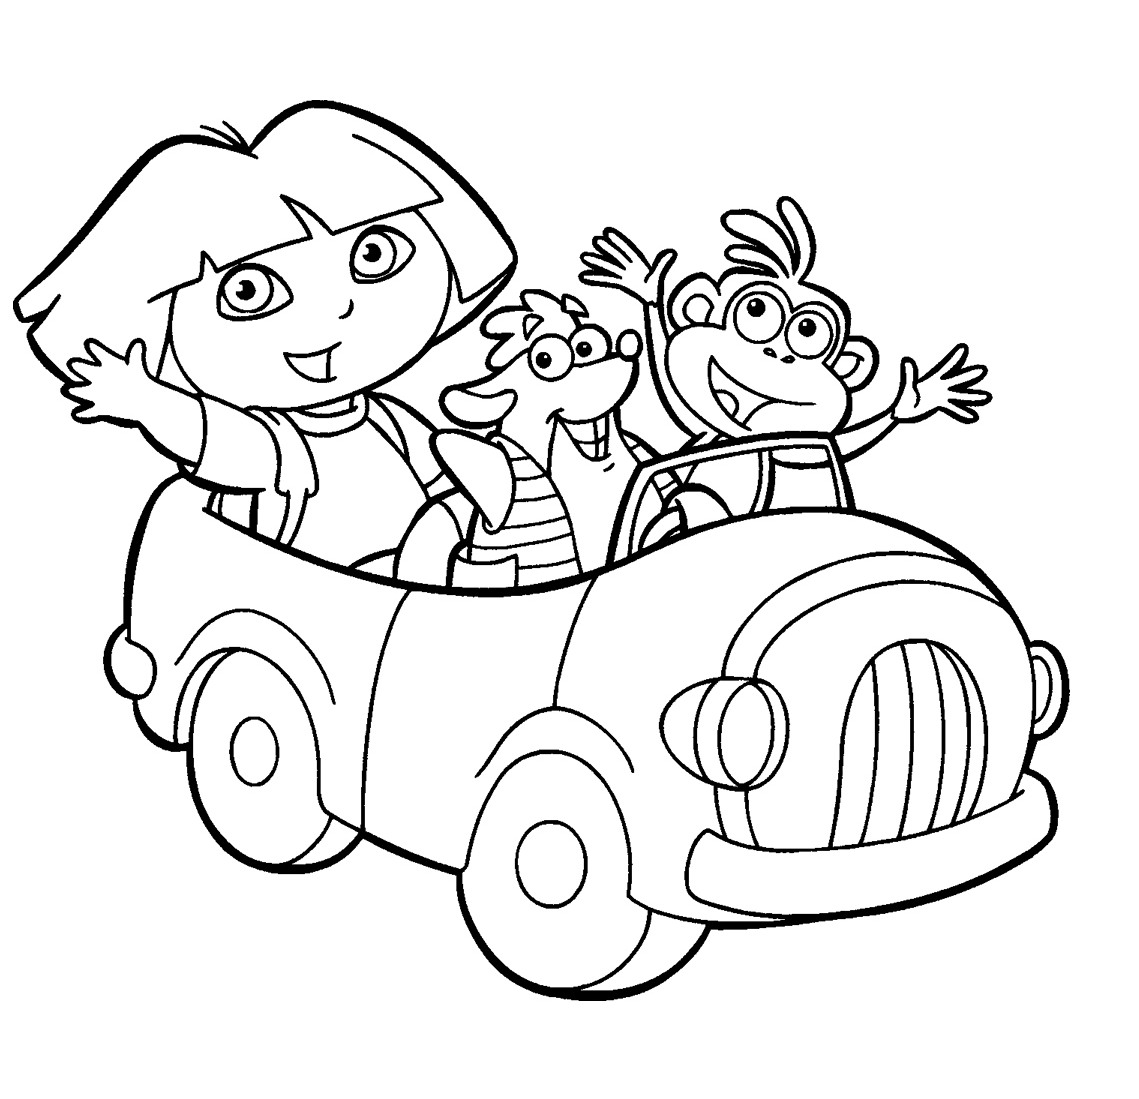 Drawing Dora the Explorer #29856 (Cartoons) – Printable coloring pages